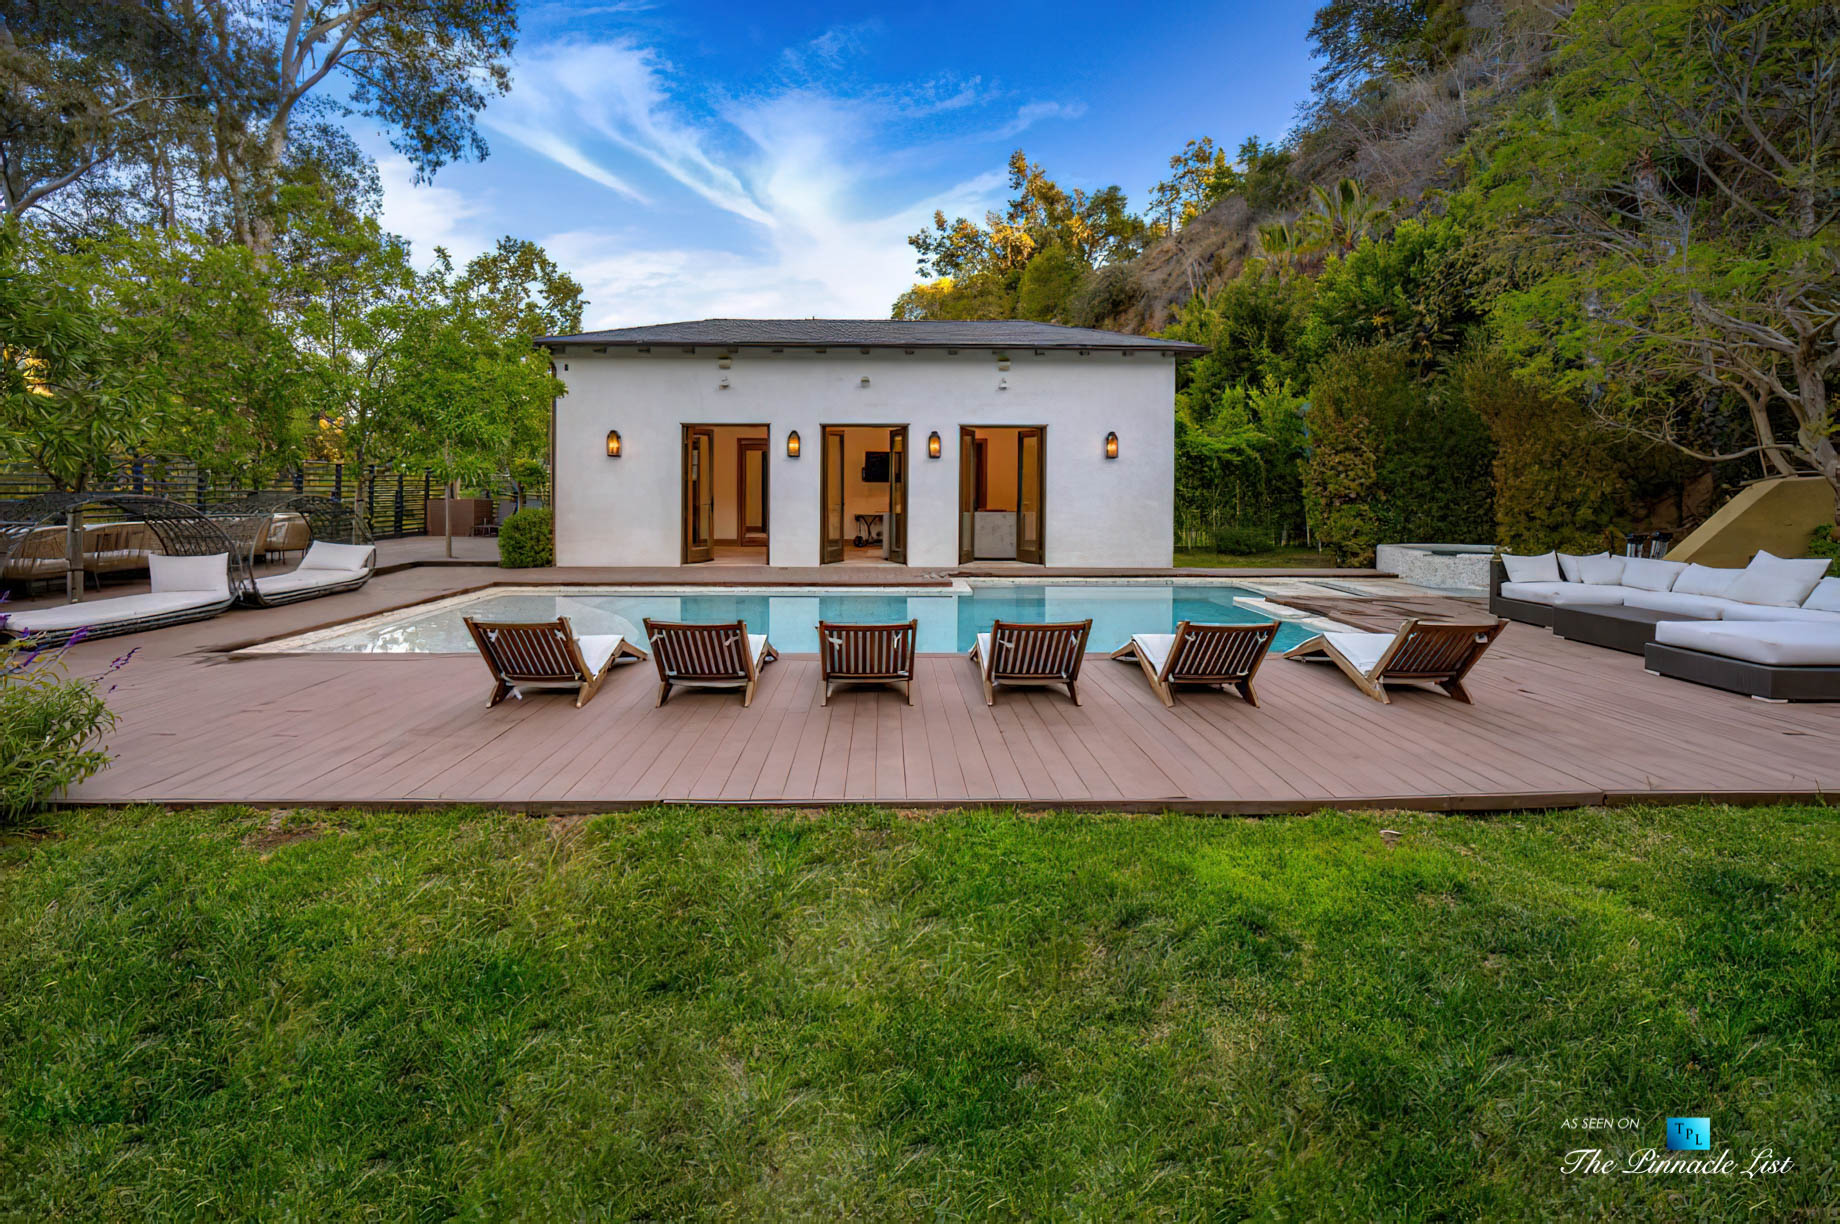 1105 Rivas Canyon Rd, Pacific Palisades, CA, USA - Luxury Real Estate - Pool Deck and Cabana